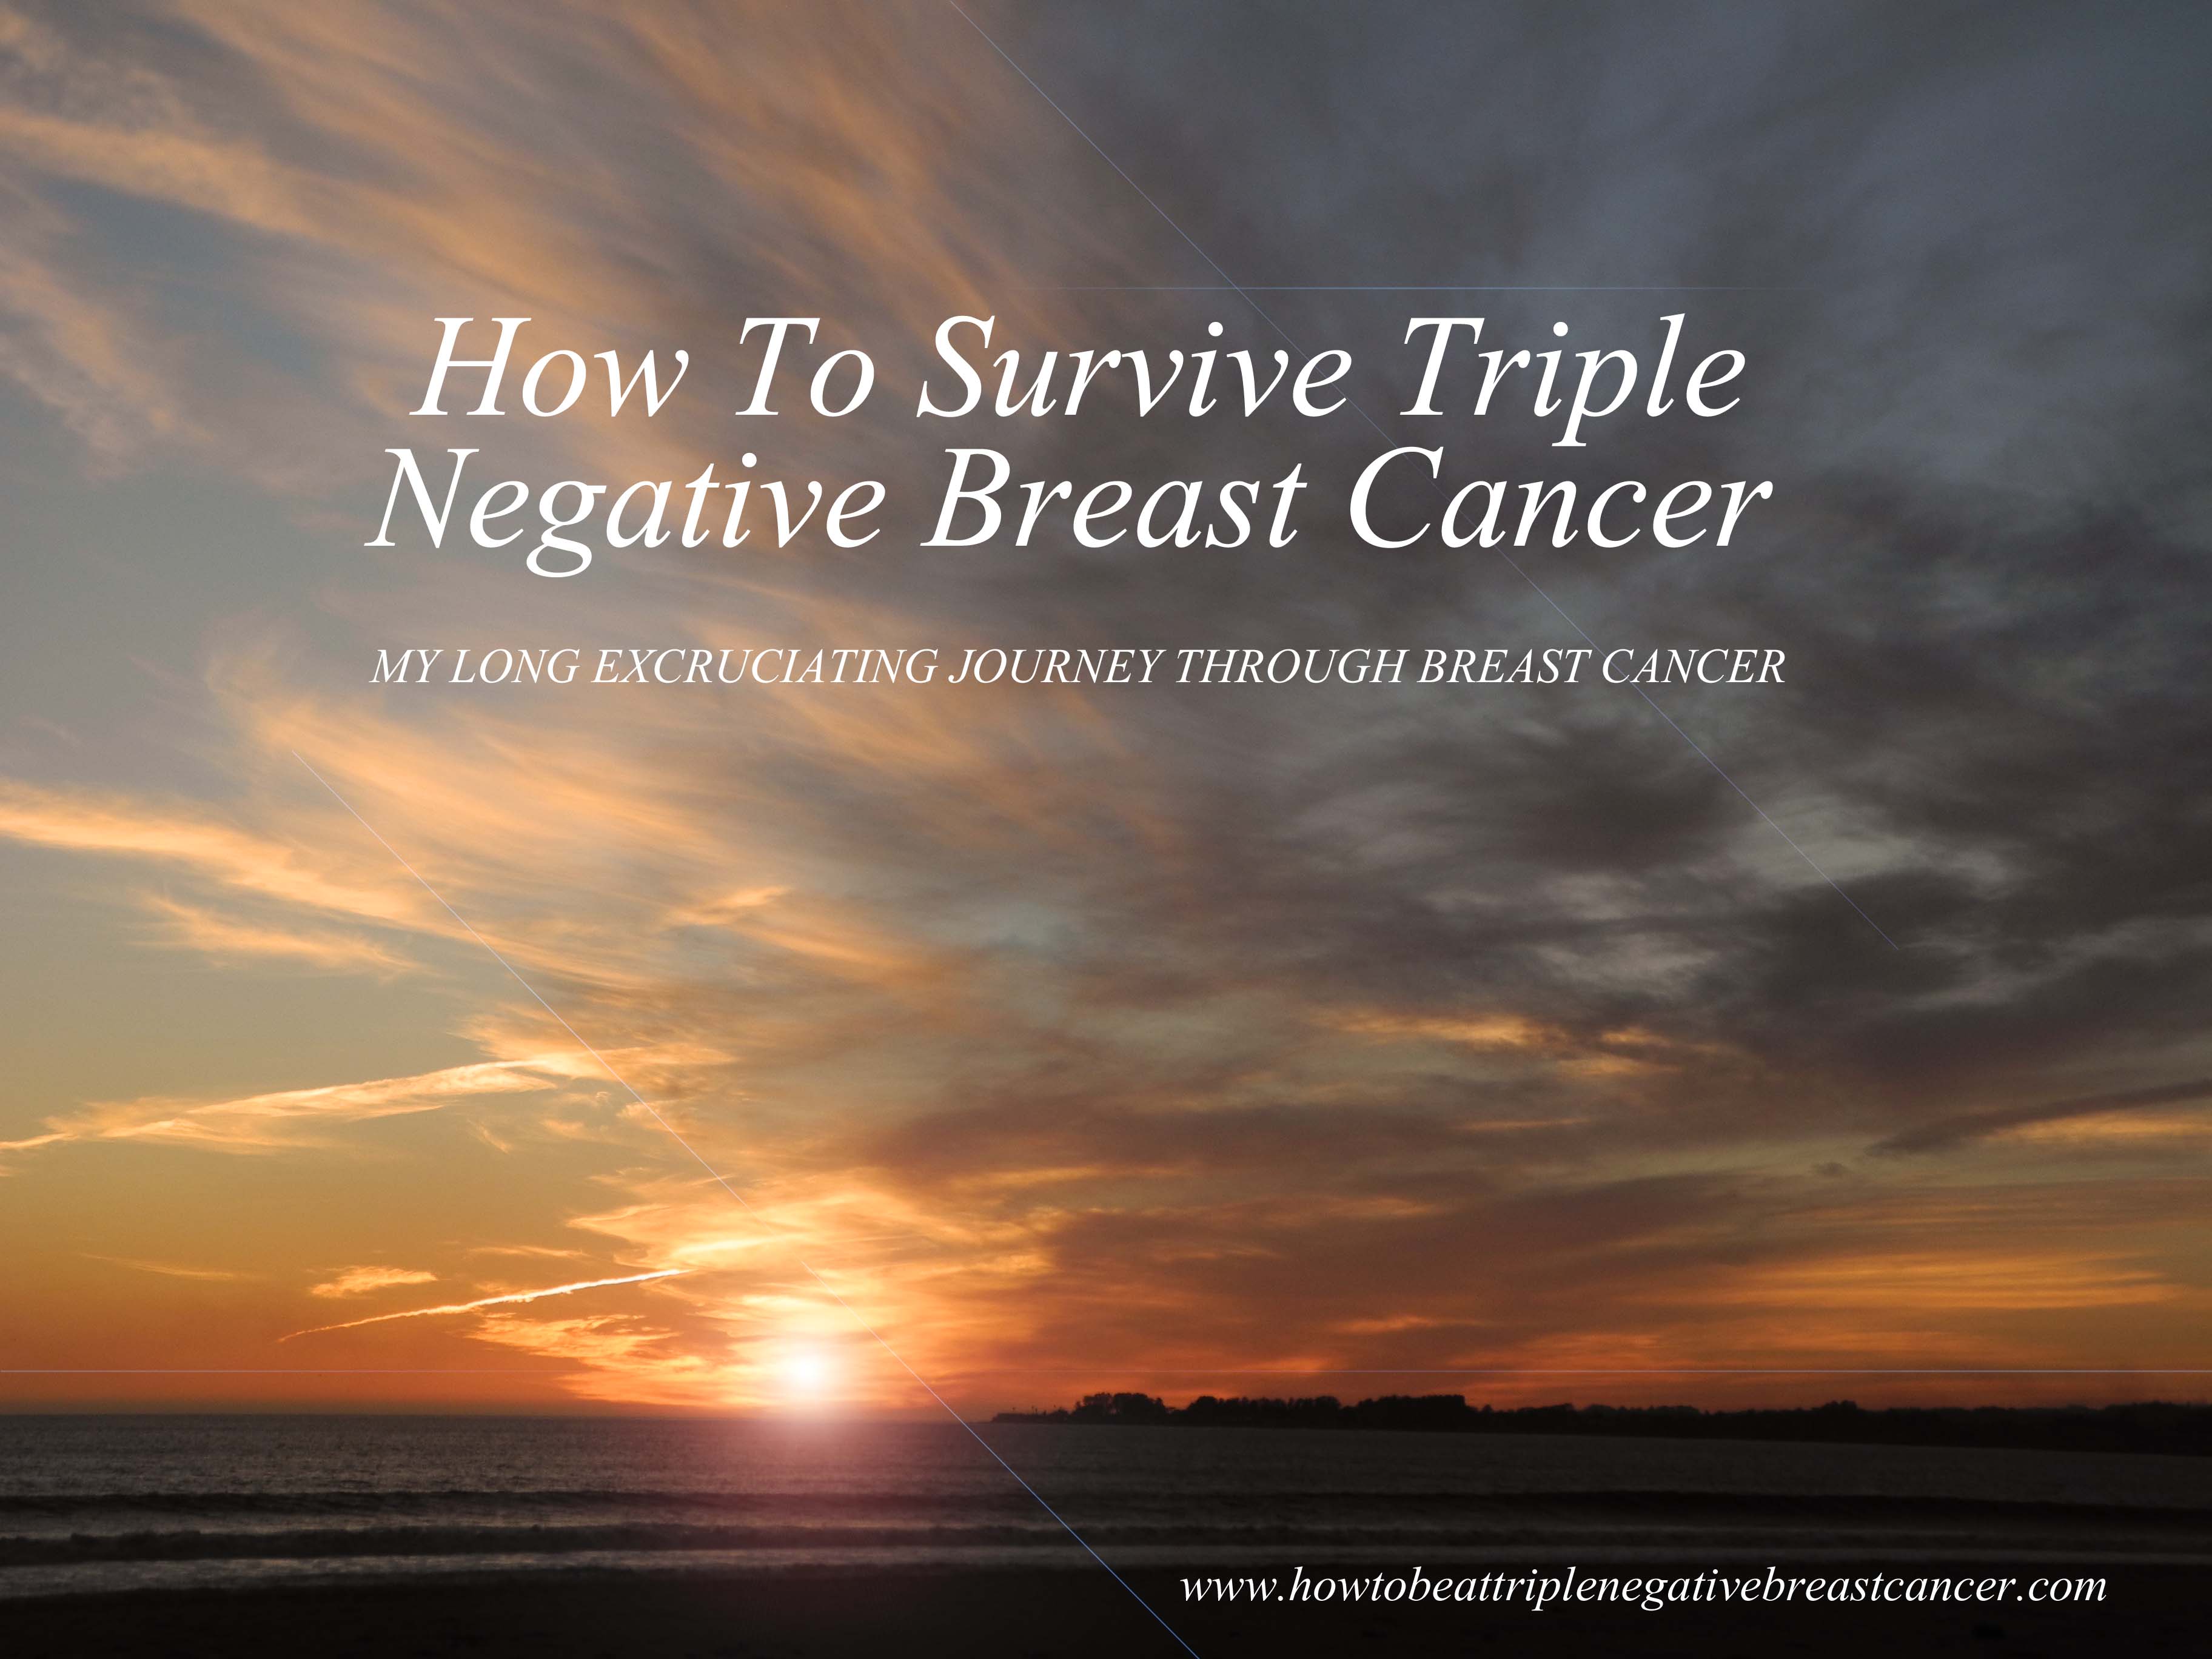 How To Survive Triple Negative Breast Cancer